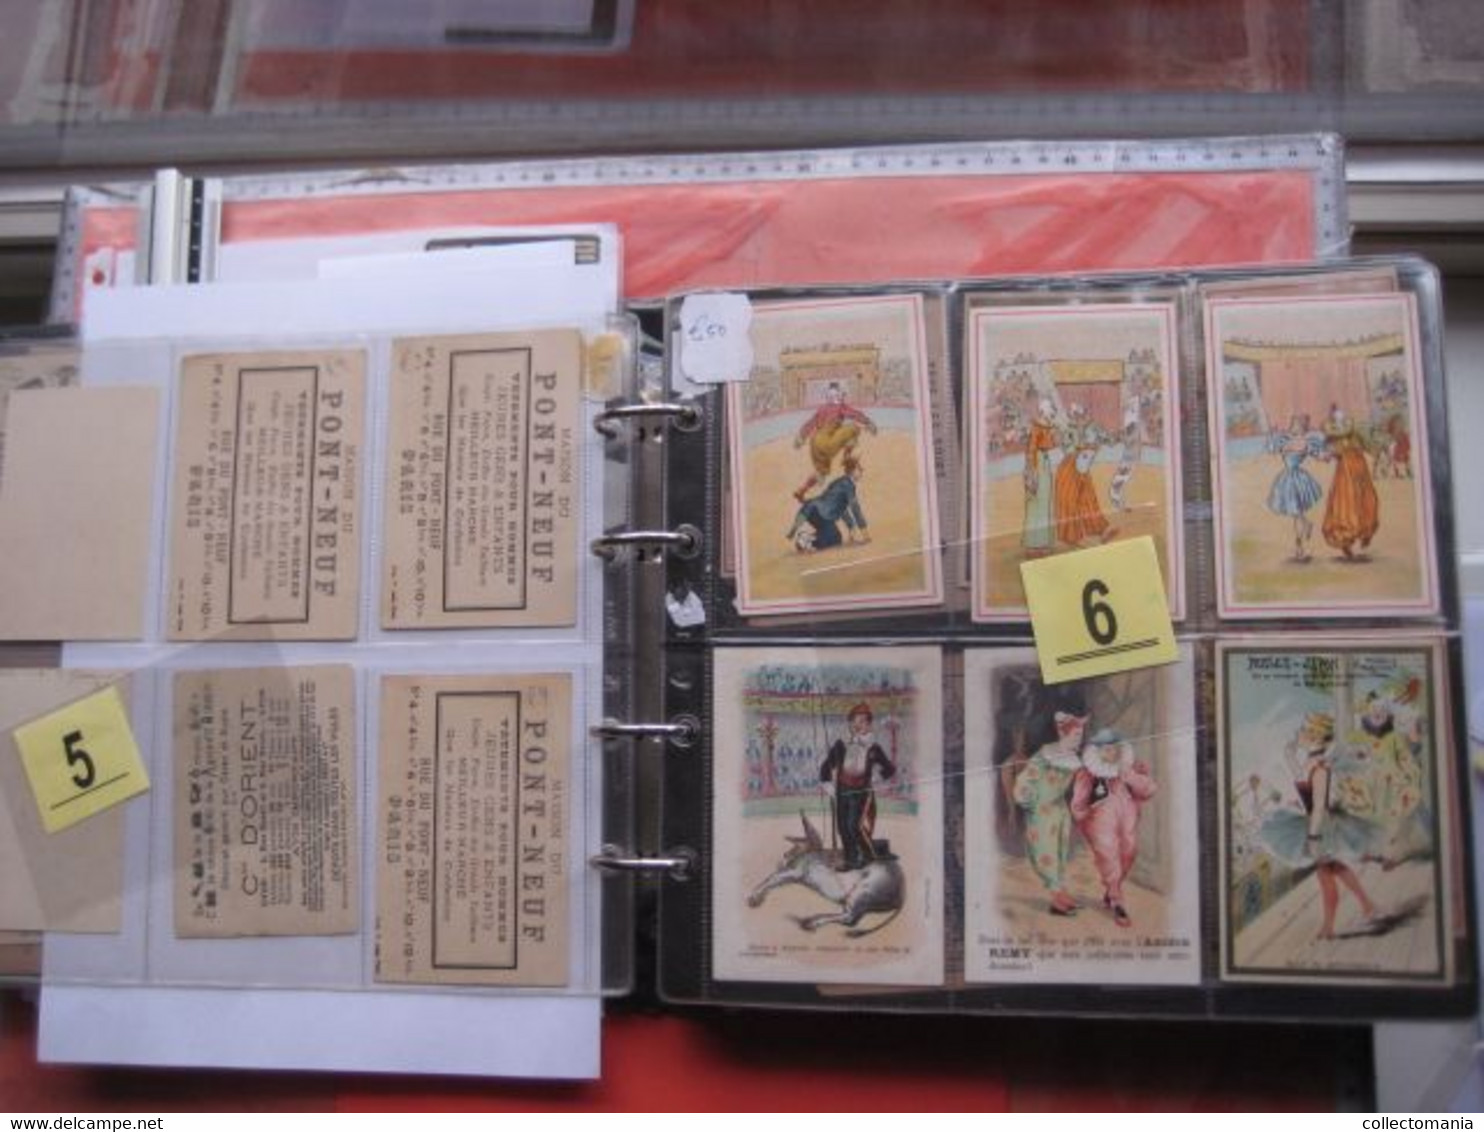 300 chromos in album, CIRCUS clowns, hand press litho cards, many PUB, nice illustrators, some  complete sets, some RRR